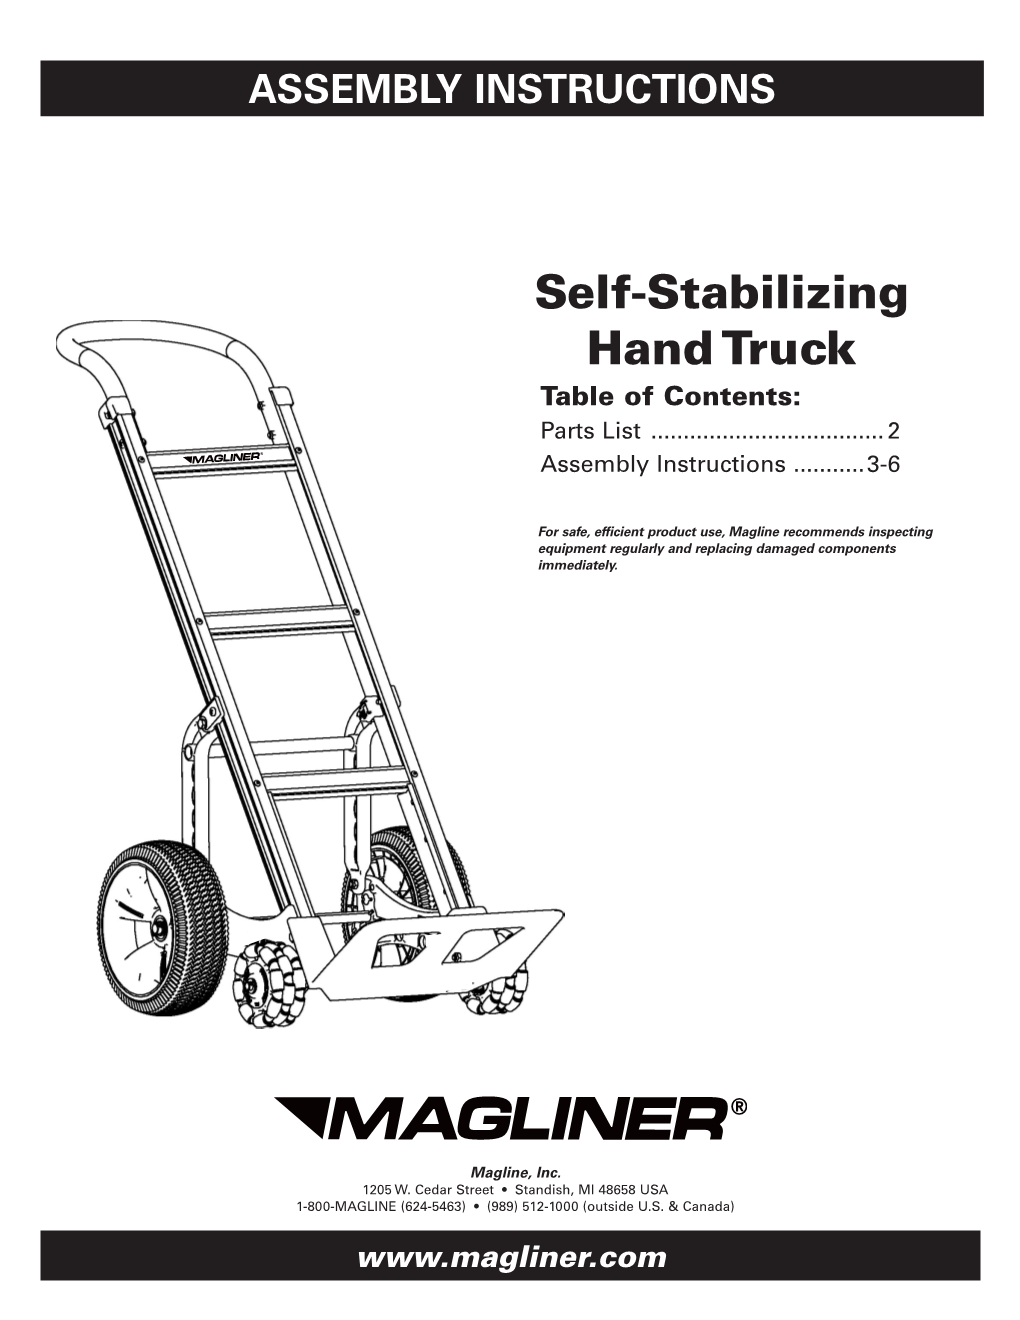 Self-Stabilizing Hand Truck Table of Contents: Parts List